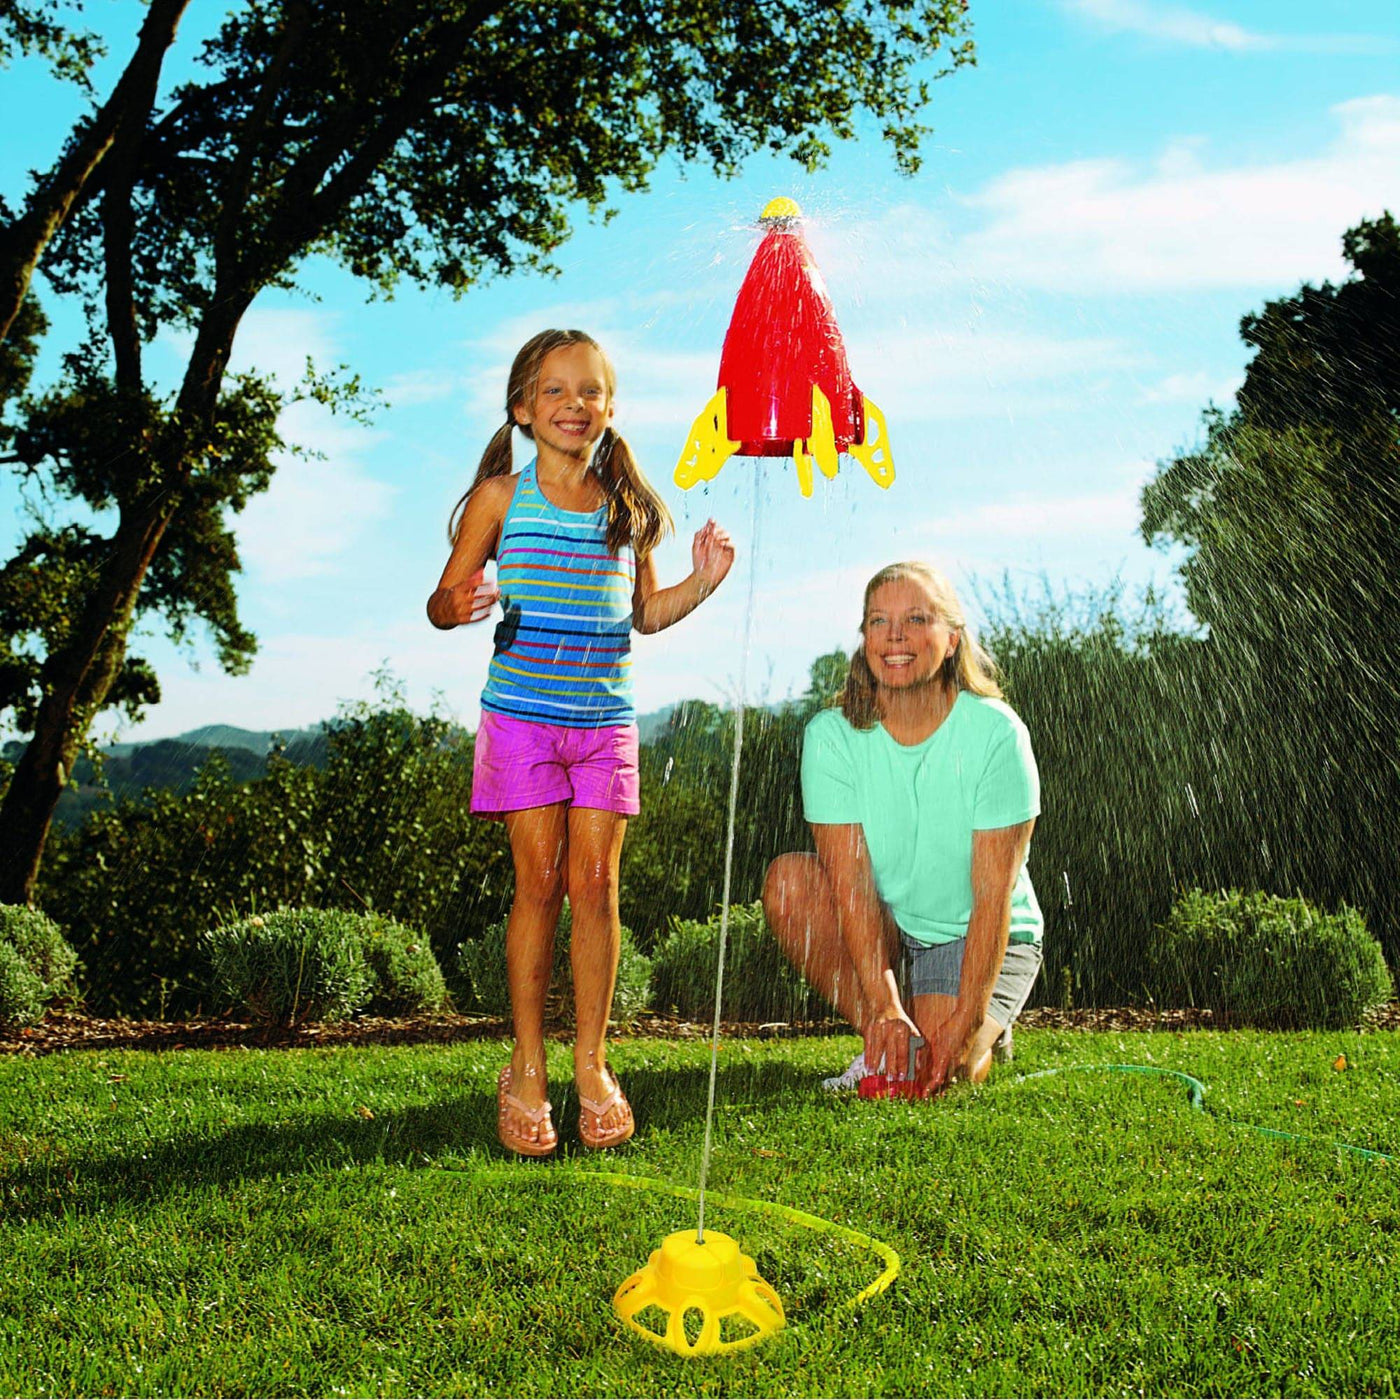 HYDRO LAUNCH Outdoor Water Sprinkler Toy - Discovery Toys